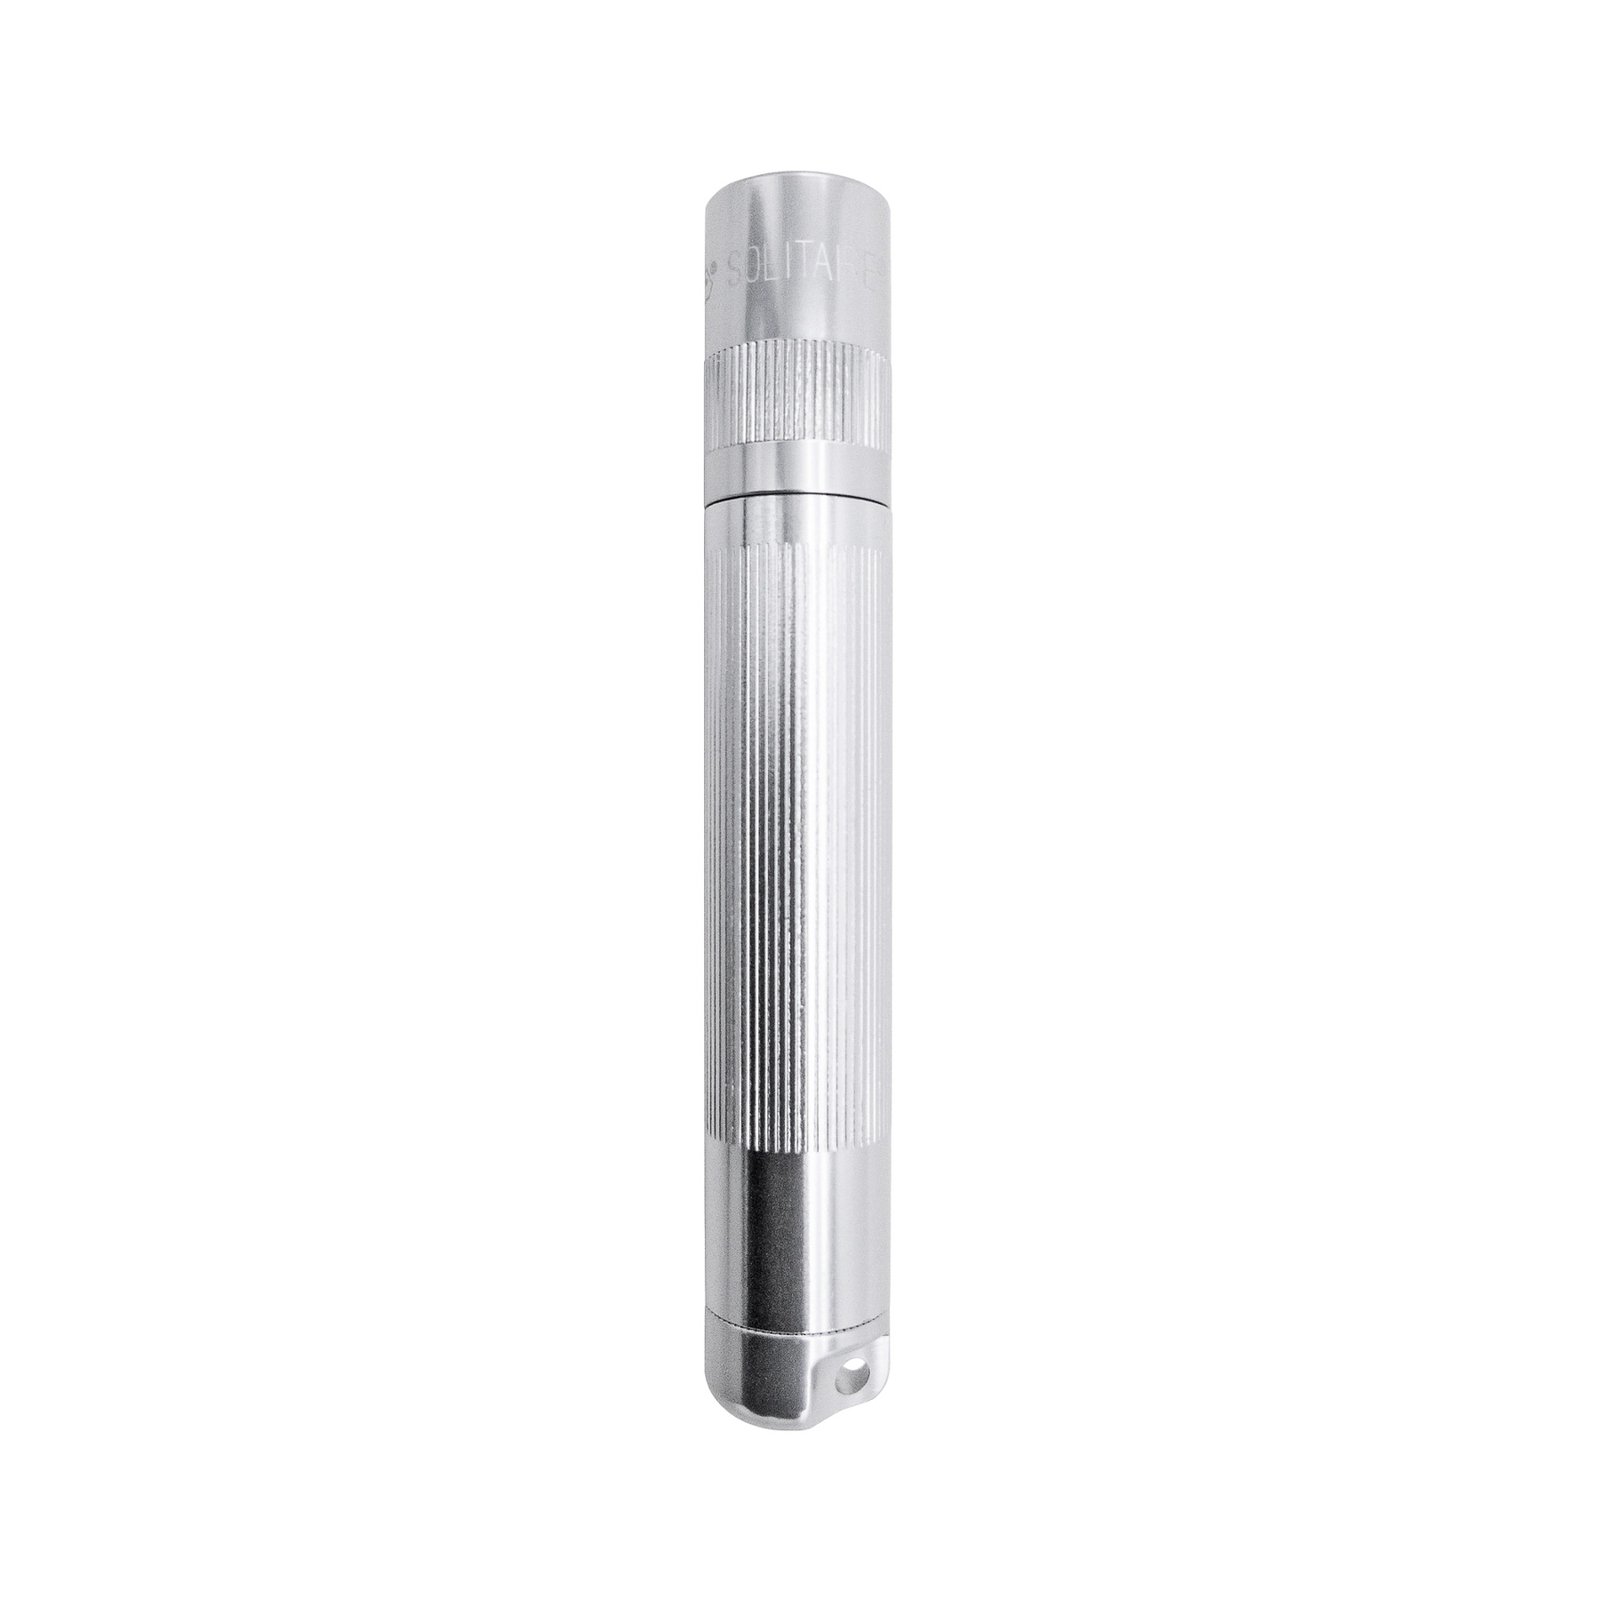 Maglite LED-ficklampa Solitaire, 1-cell AAA, silver